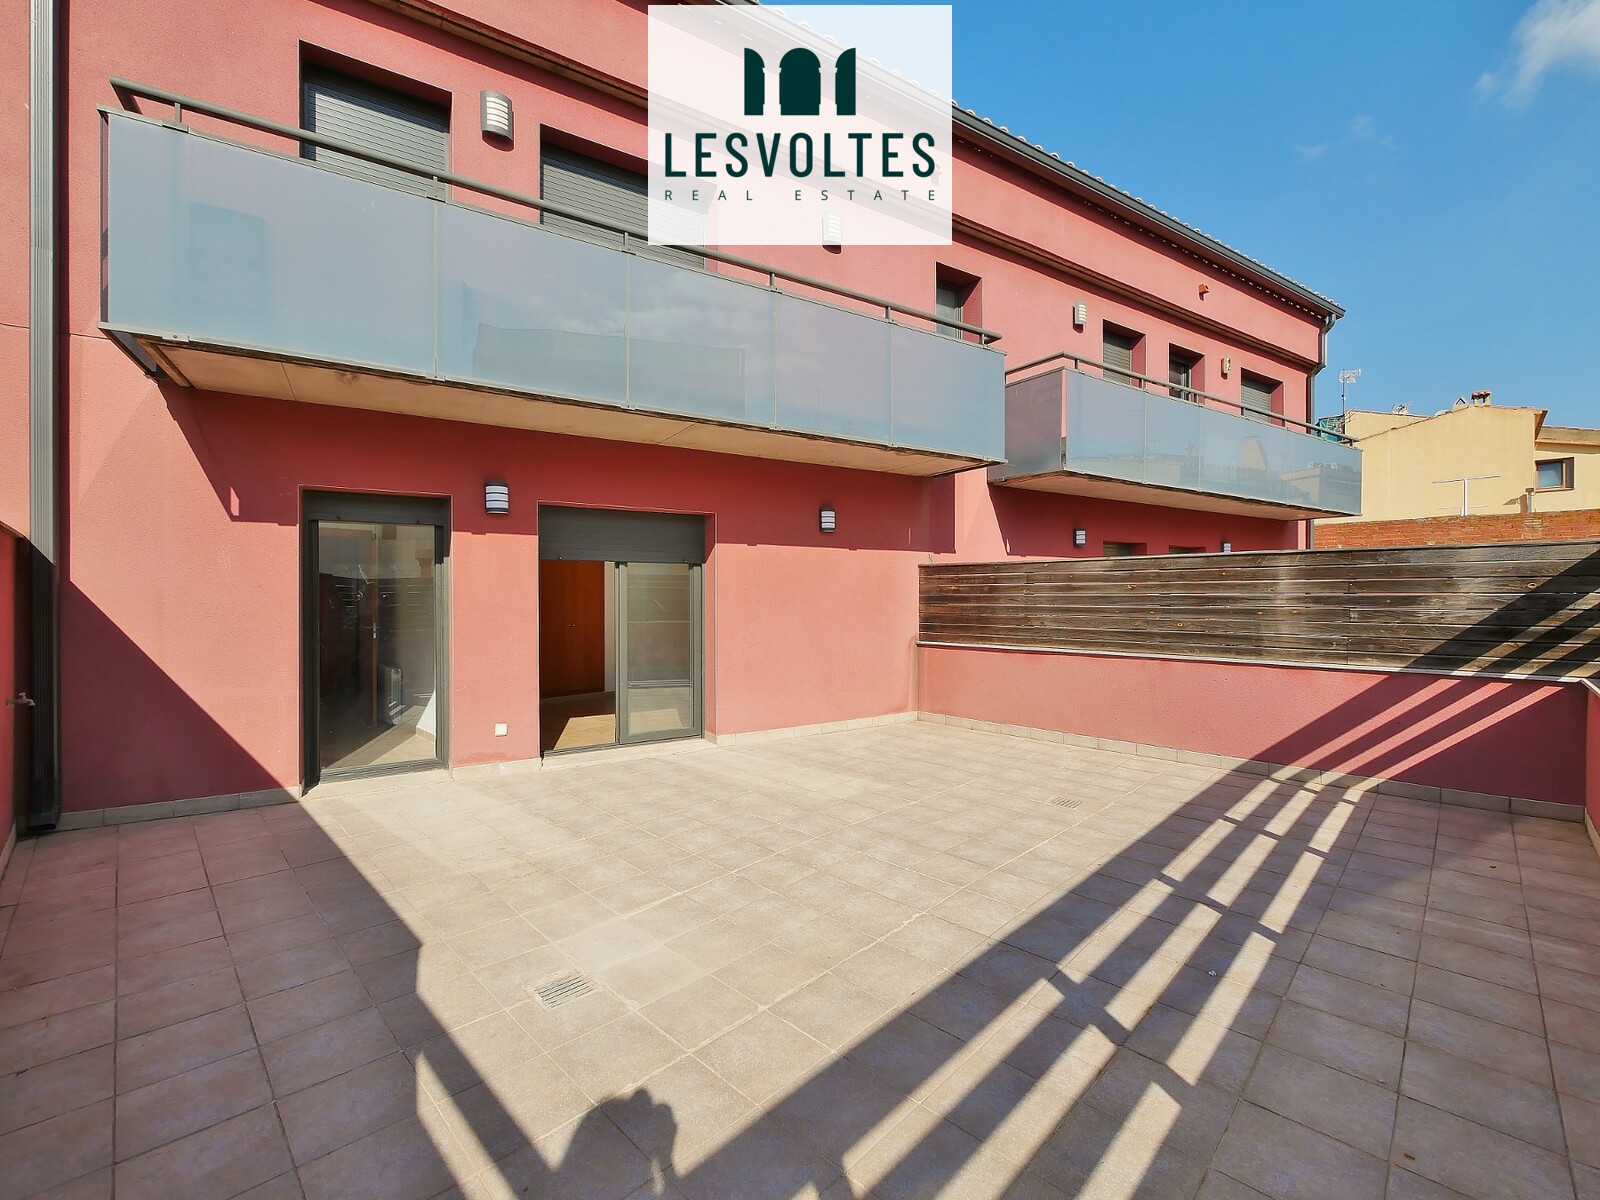 FANTASTIC FLAT WITH LARGE TERRACE AND PARKING SPACE IN PALAFRUGELL.